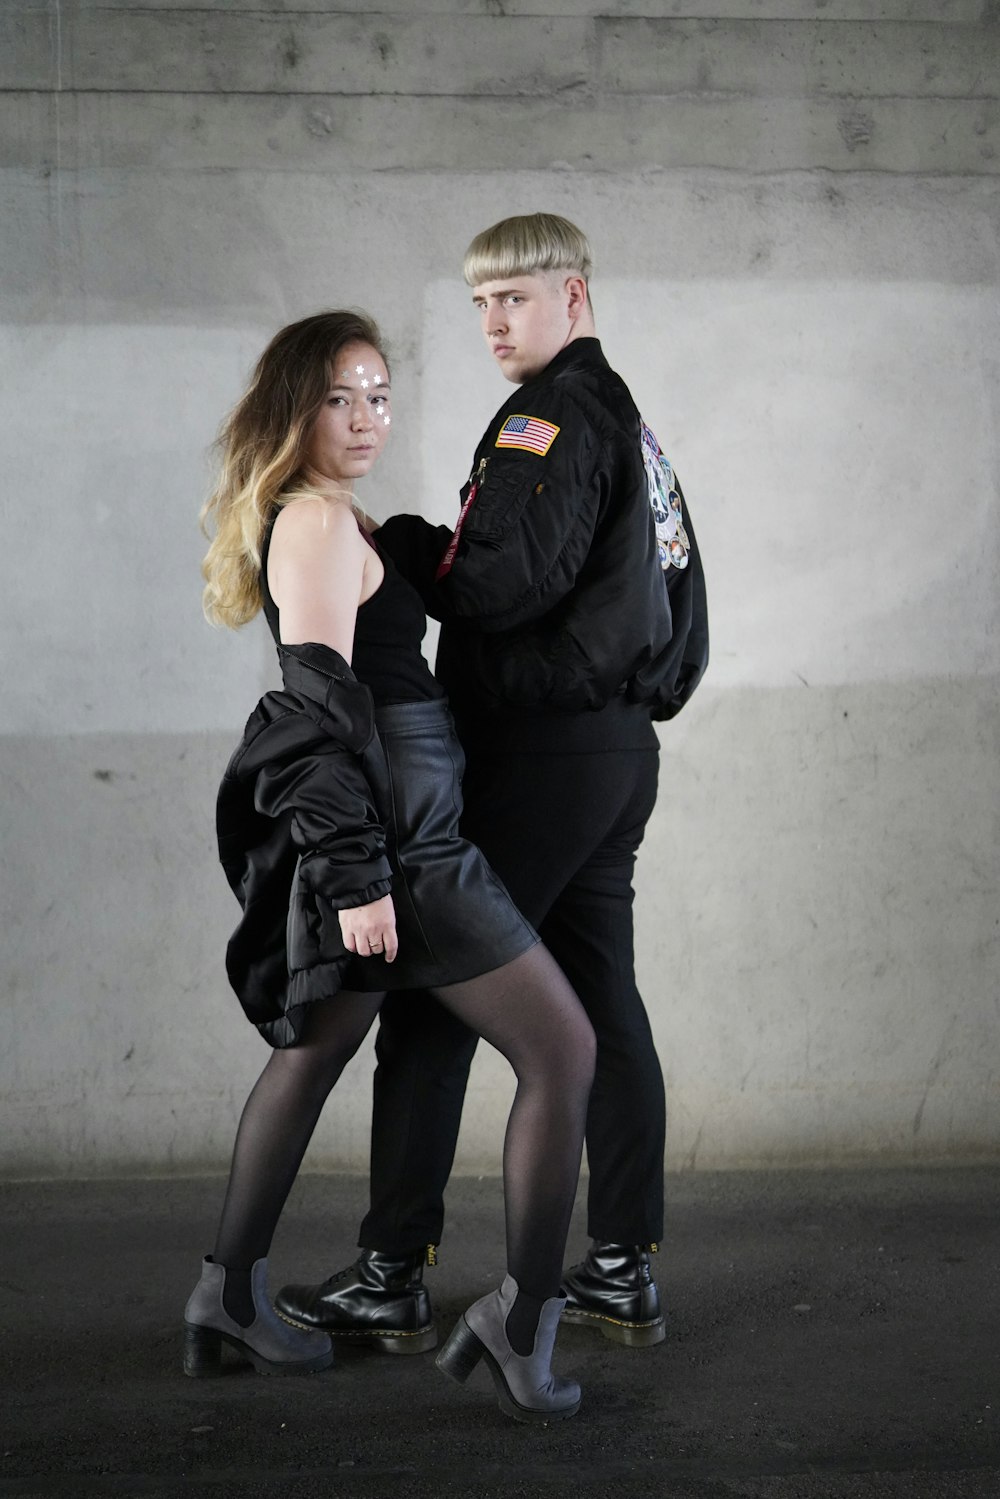 man wearing black jacket and black pants and woman wearing black blouse with black leather skirt